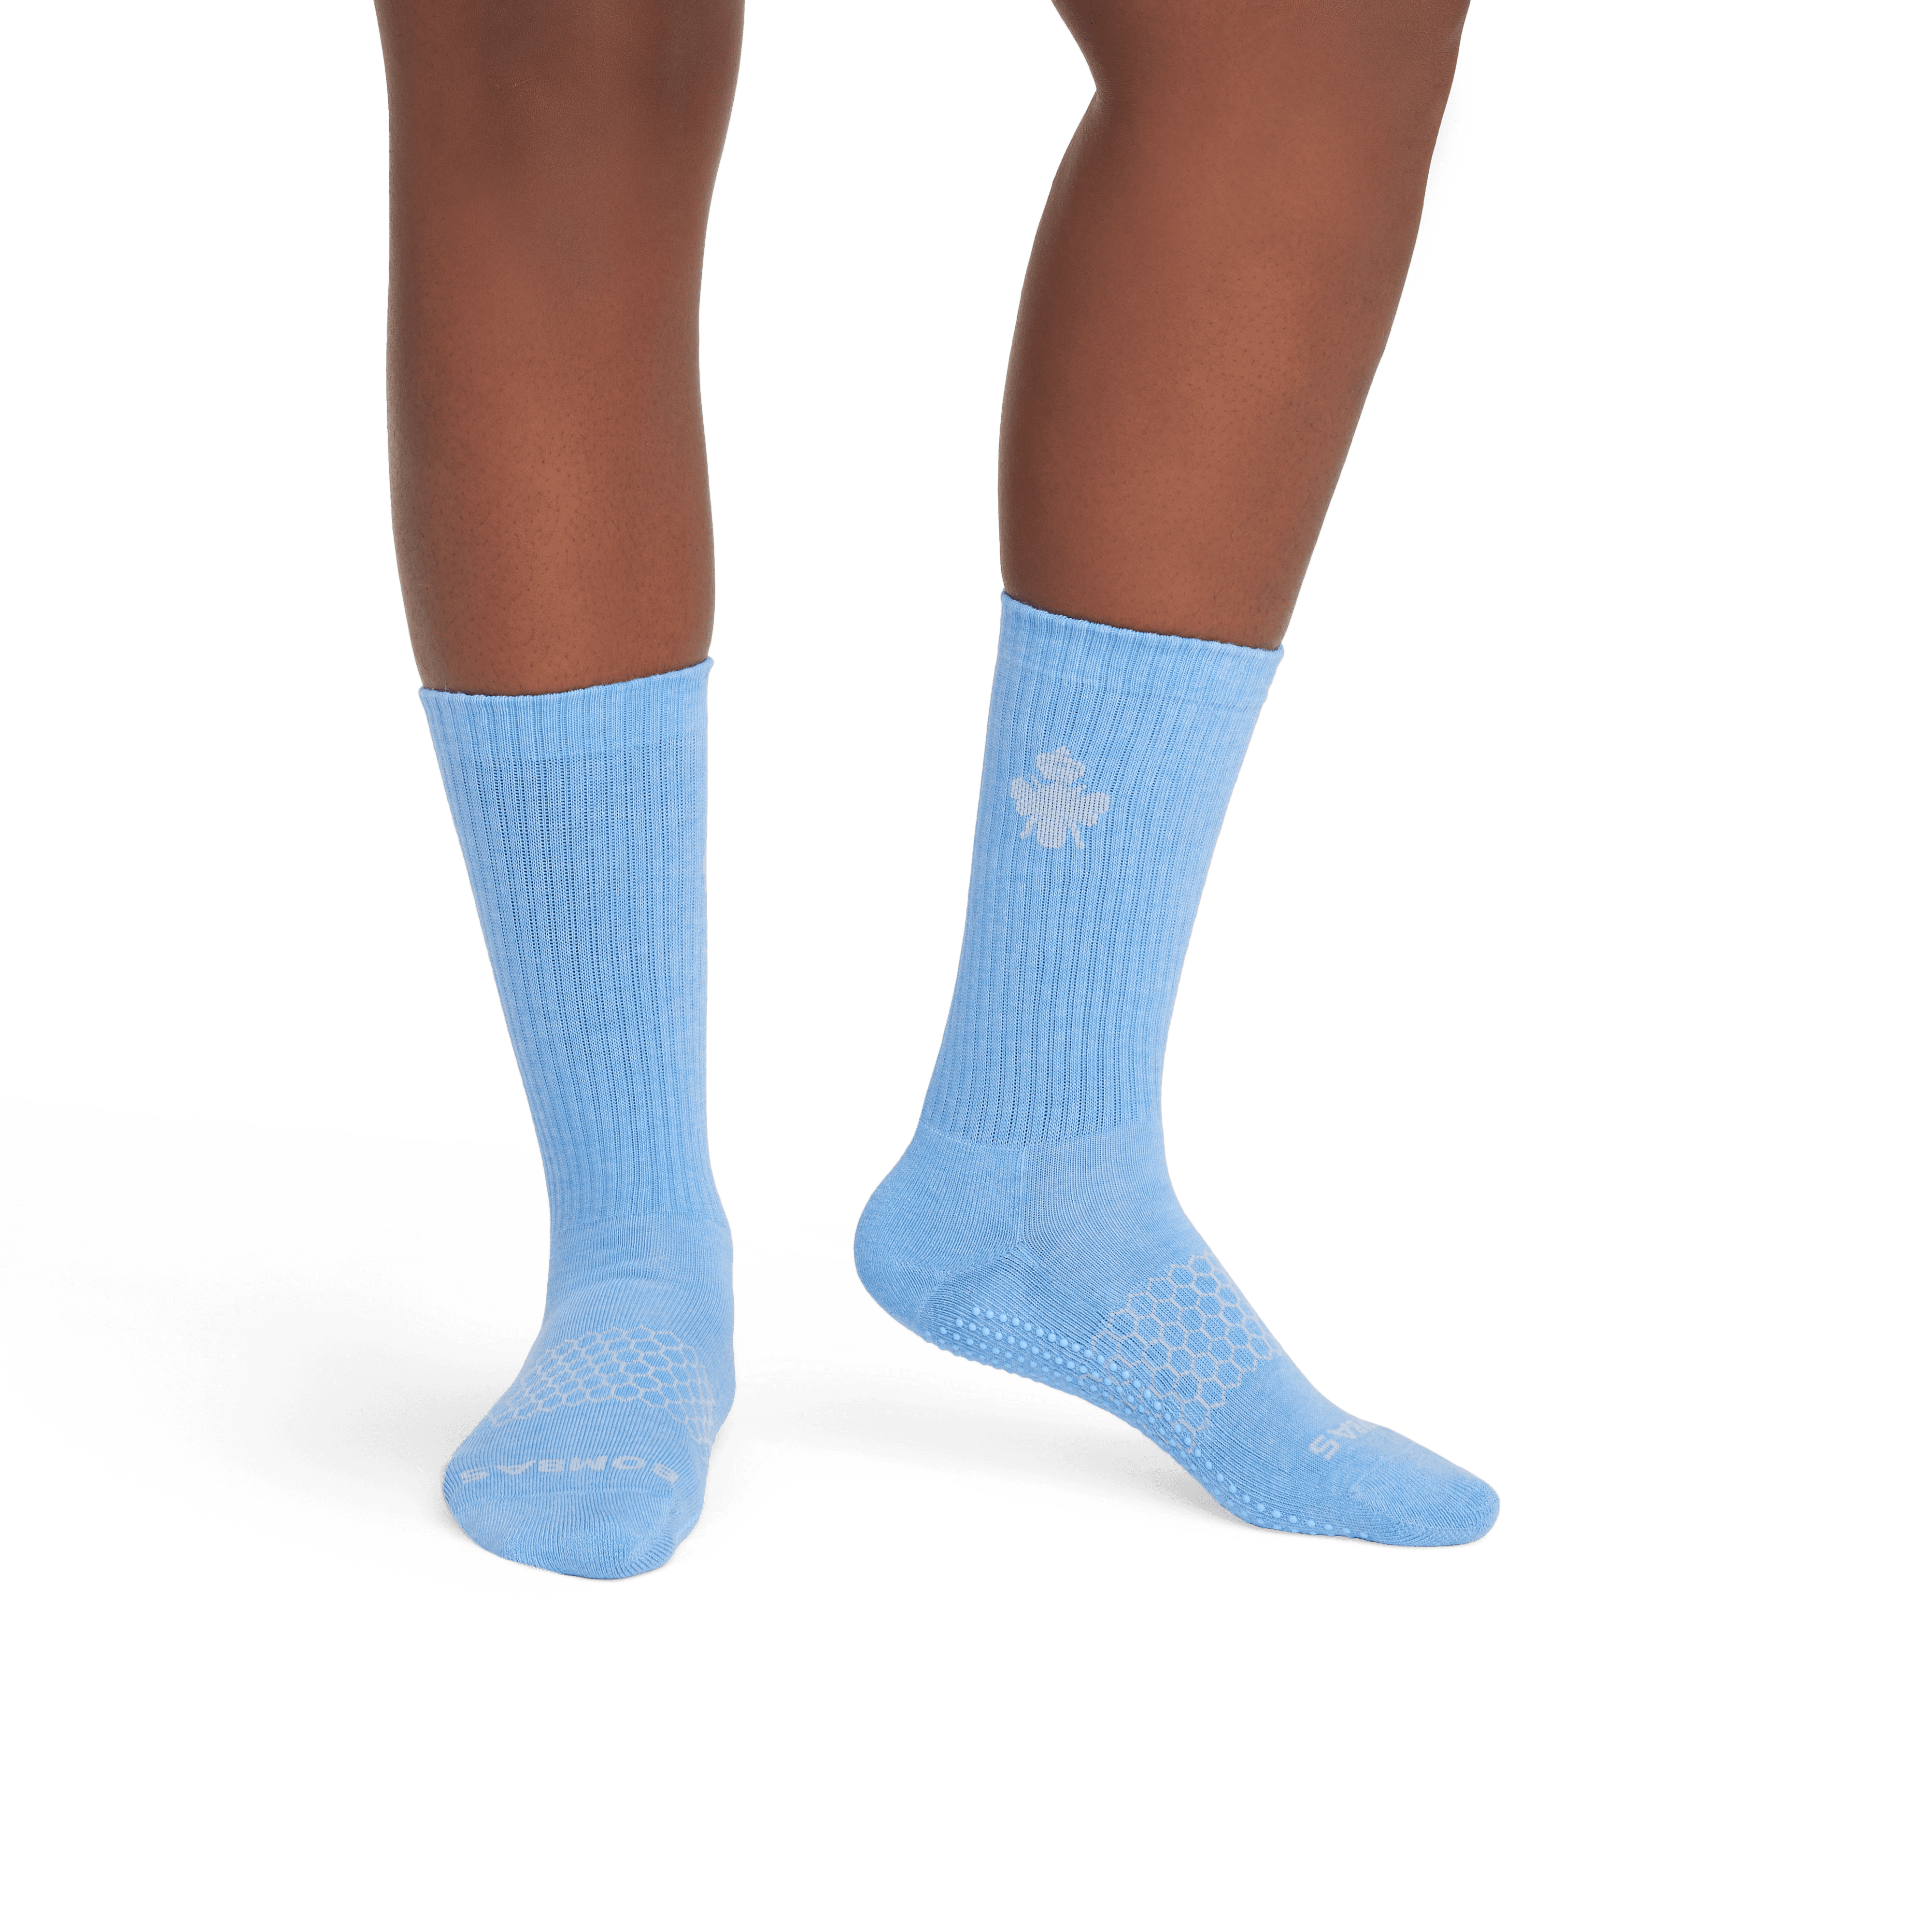 Bombas Women's 4 Pairs Gripper Calf Socks bee better Size Large 4 color Mix